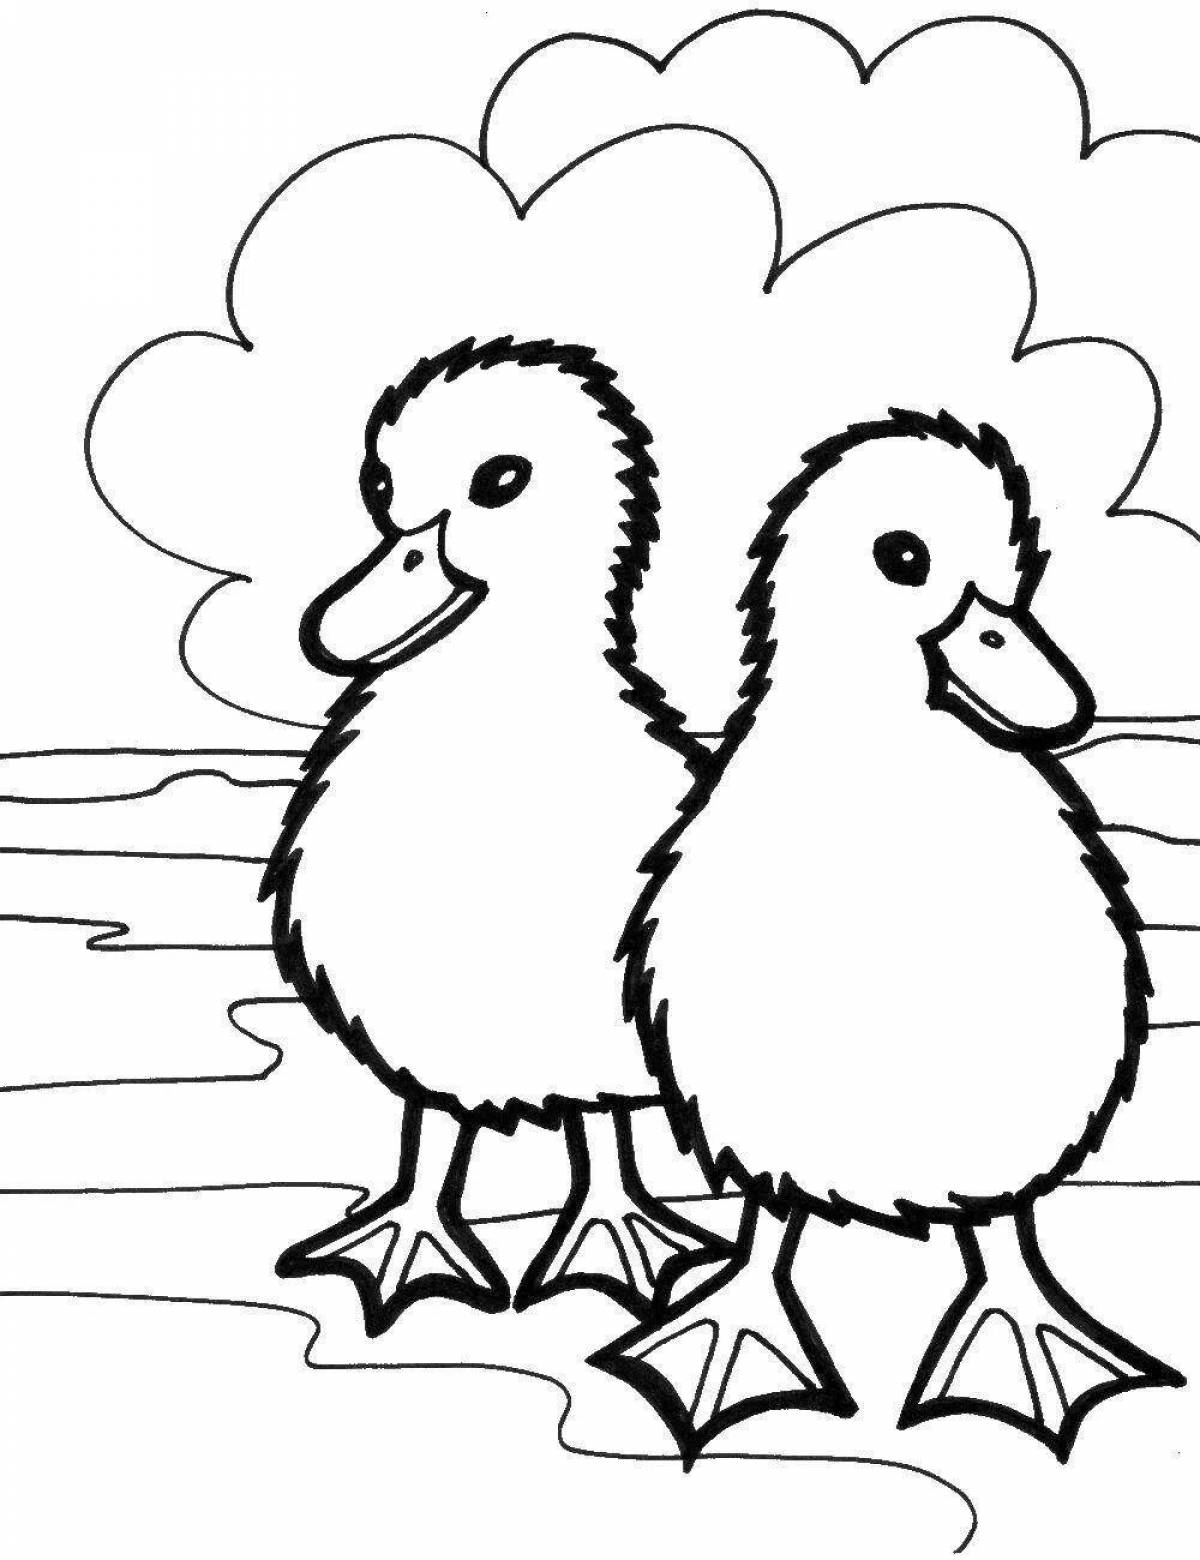 Magic duck coloring book for girls